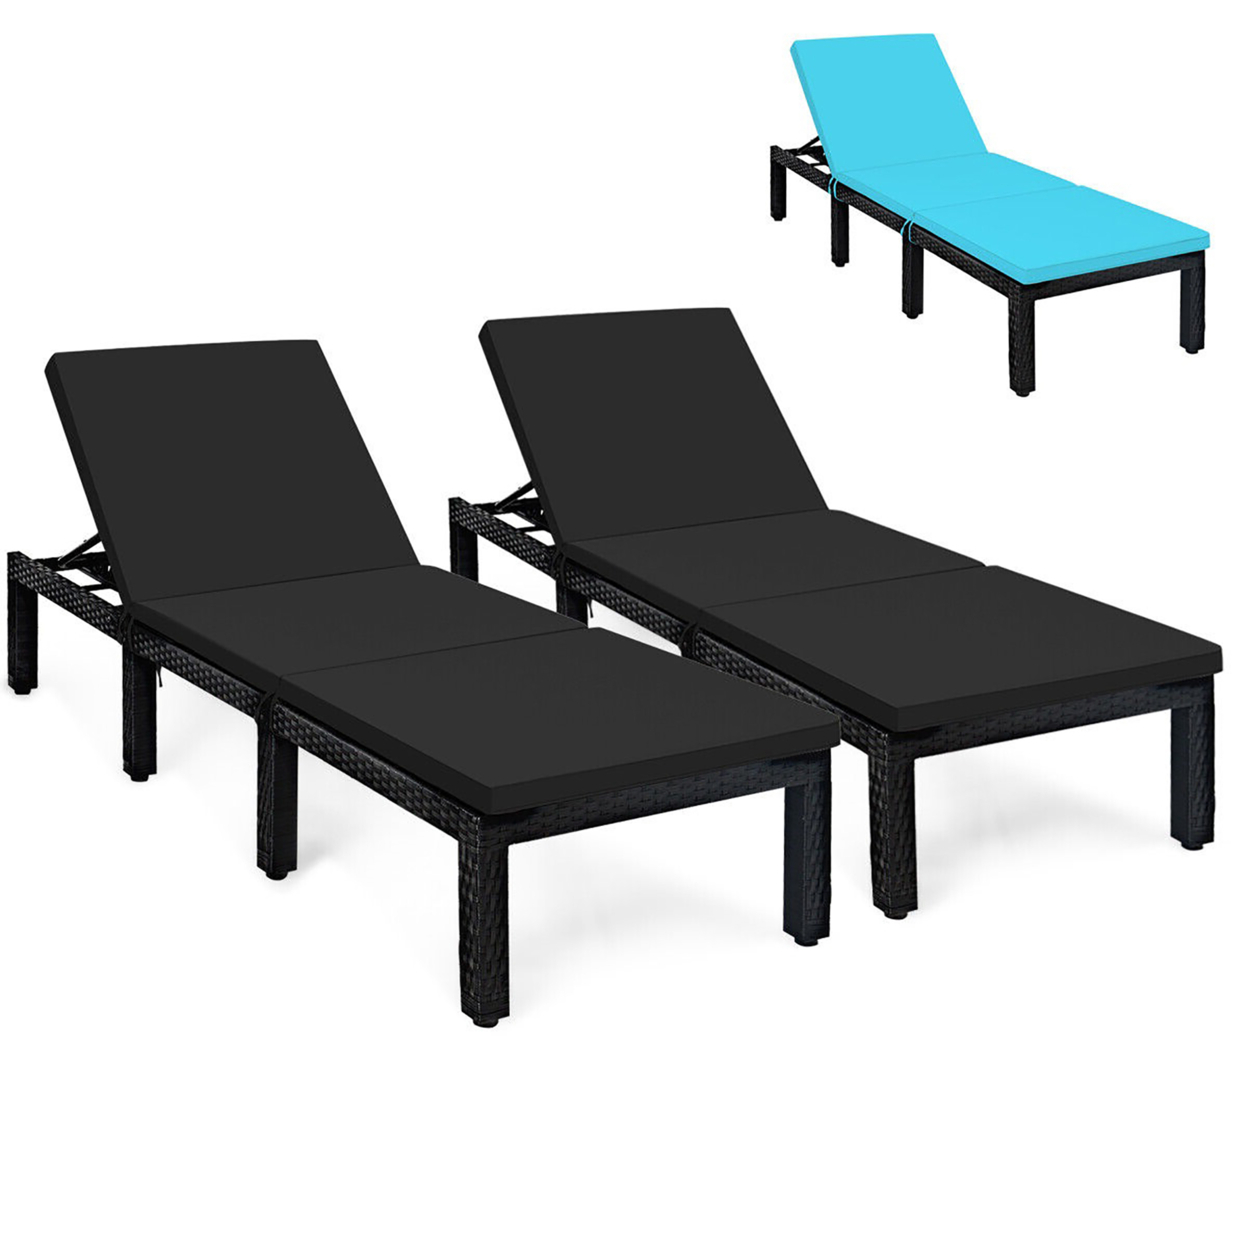 2PCS Adjustable Rattan Patio Chaise Lounge Chair Couch W/ Black & Turquoise Cushion